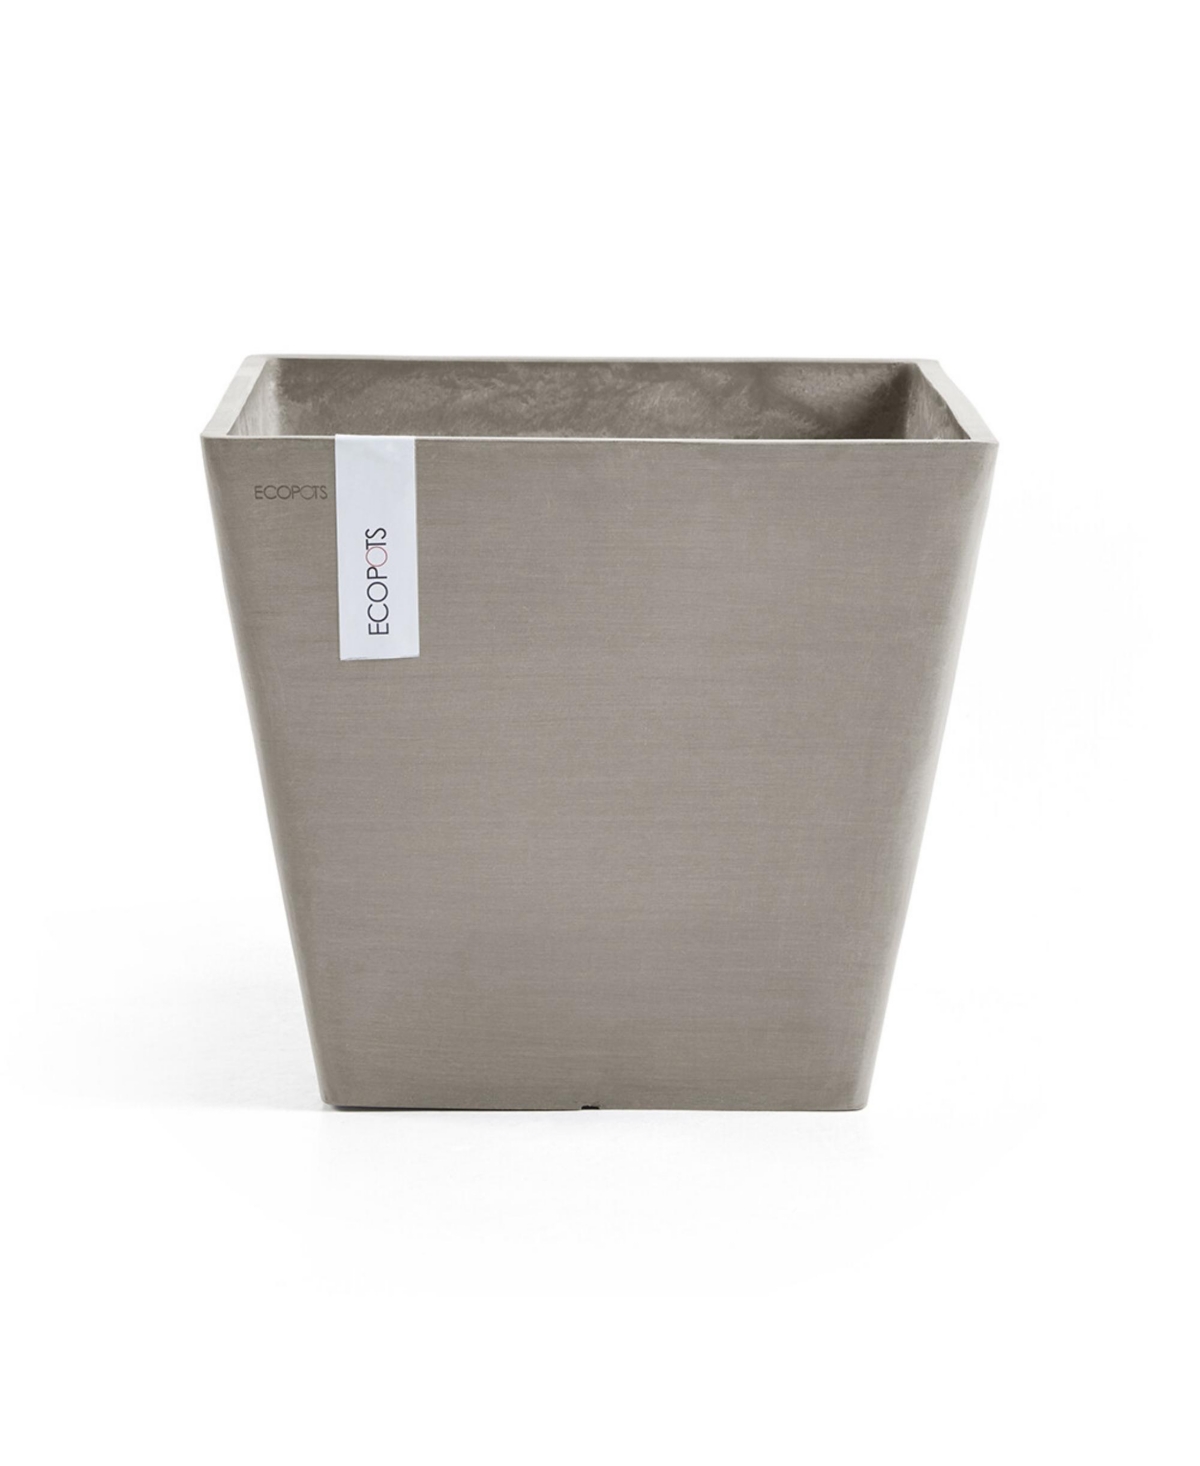 Rotterdam Indoor and Outdoor Square Planter, 12in - Taupe